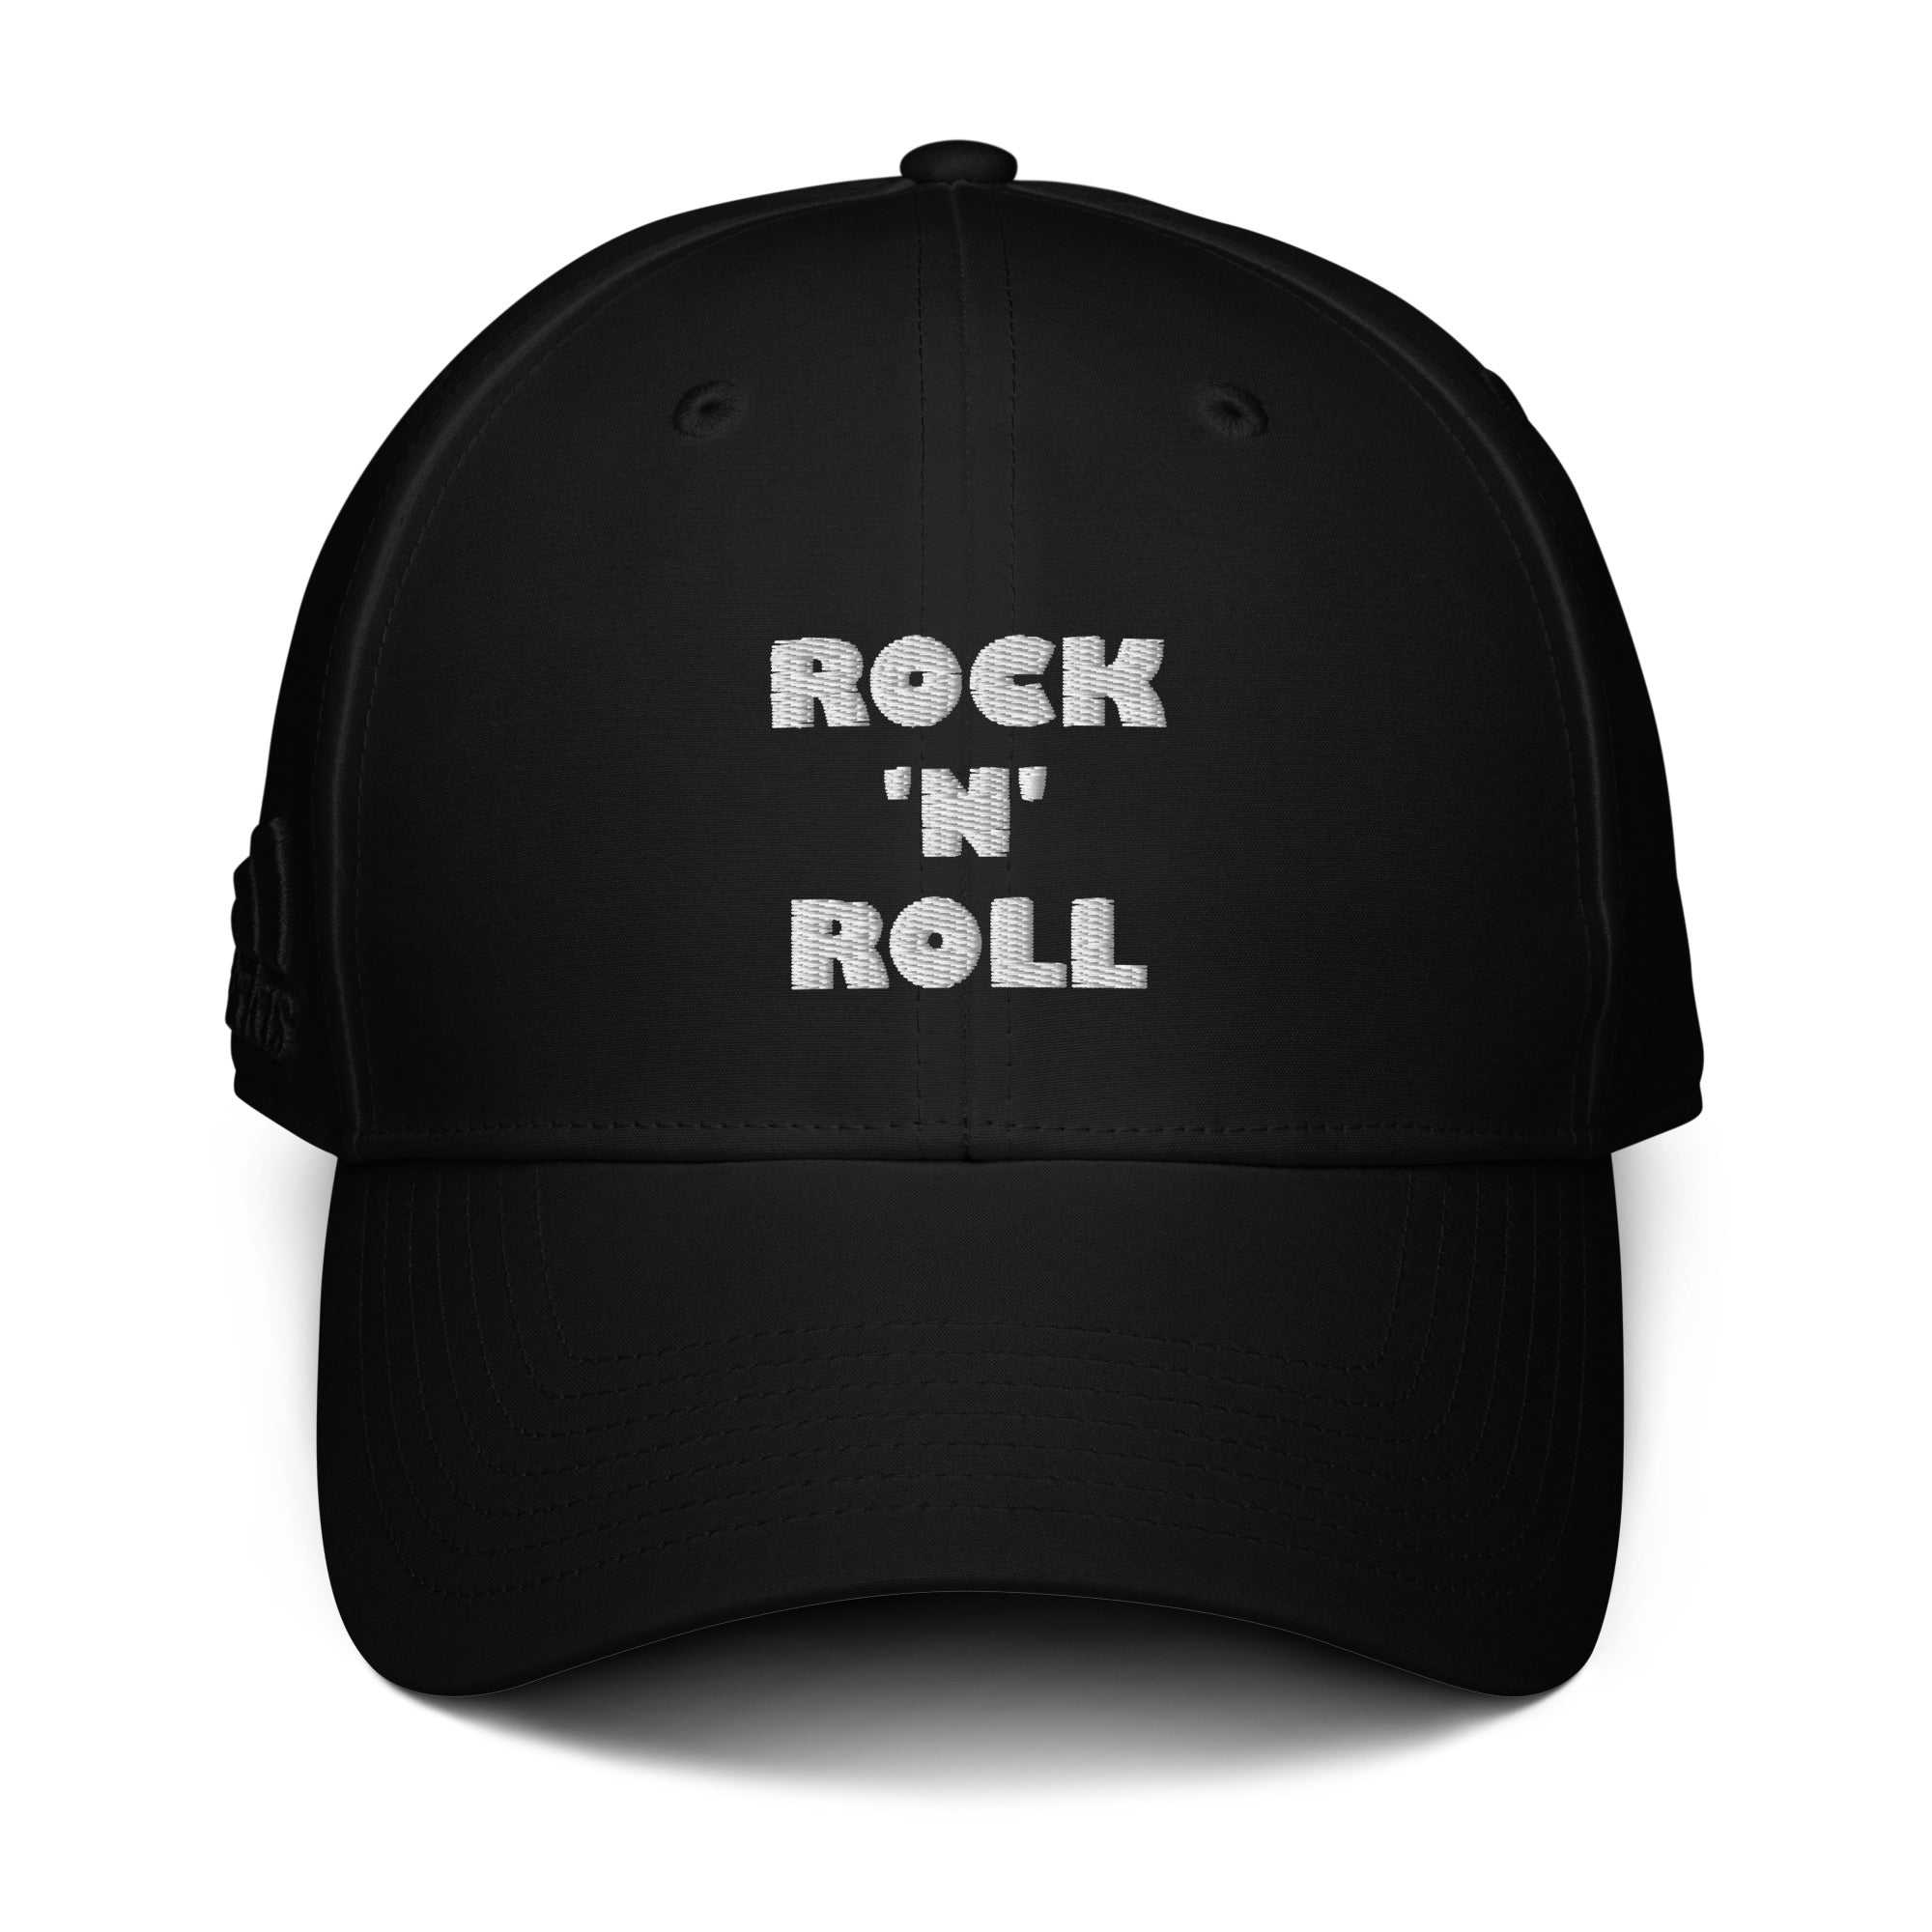 Rock 'n' Roll Embroidered Adidas / Electric Eye dad baseball hat - white embroidery (more colours available)